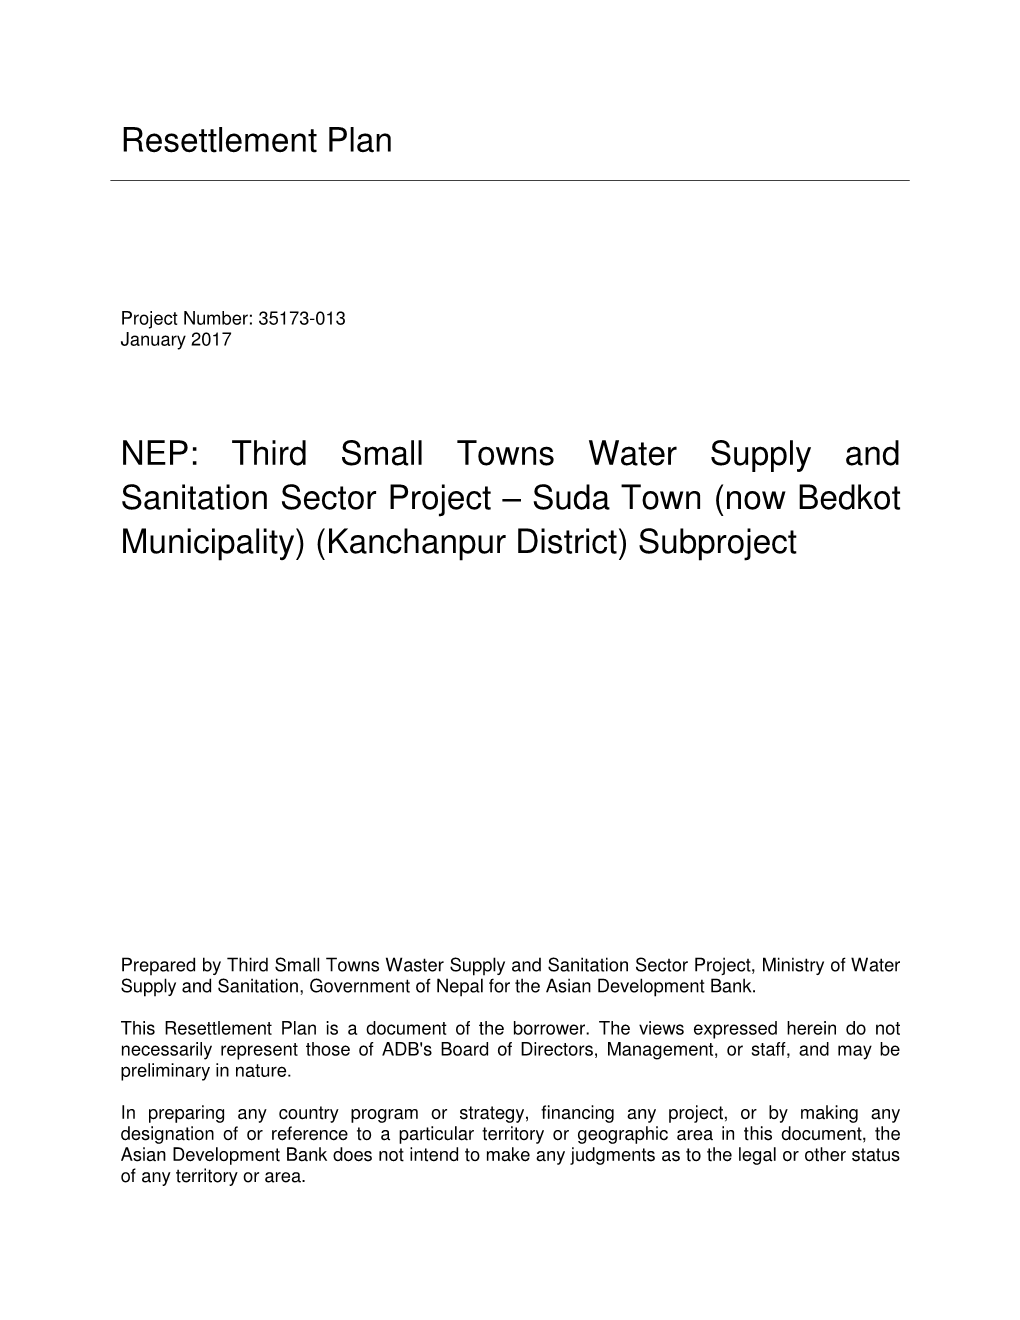 Third Small Towns Water Supply and Sanitation Sector Project – Suda Town (Now Bedkot Municipality) (Kanchanpur District) Subproject